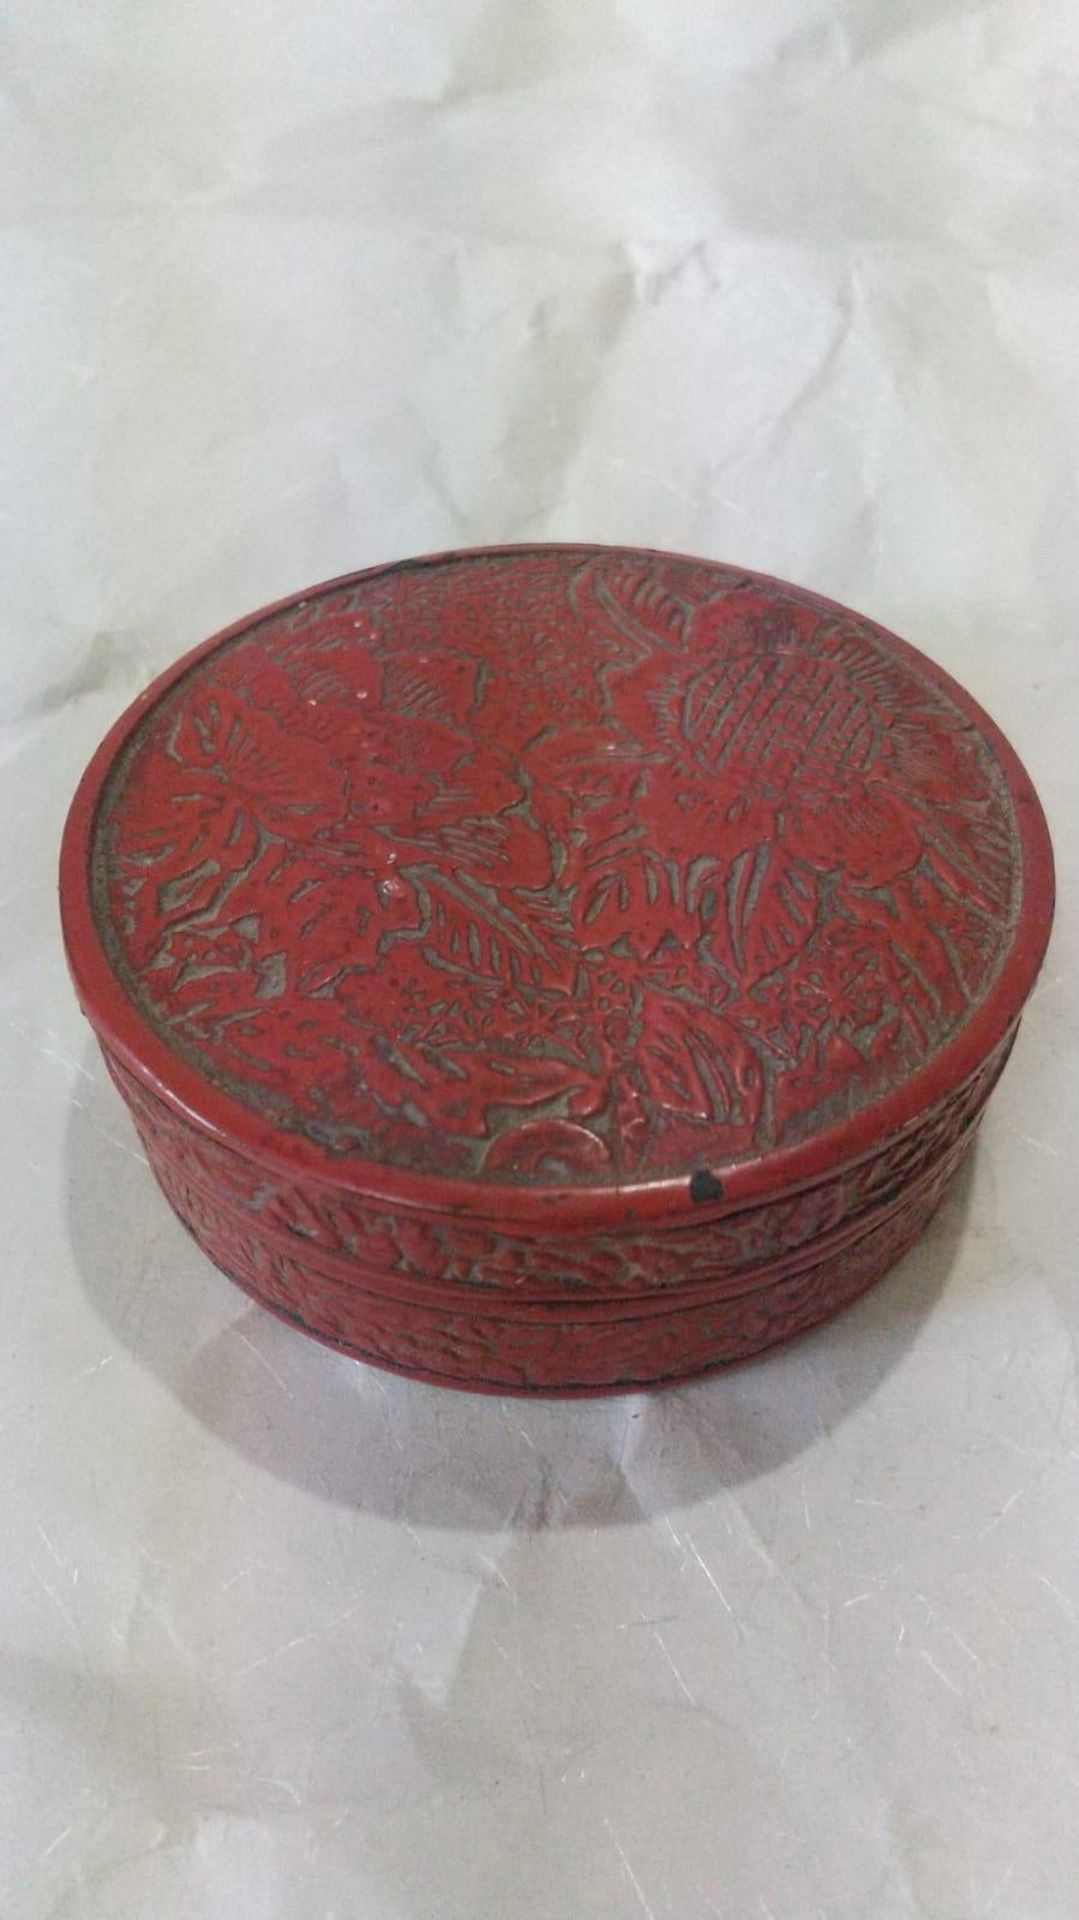 Antique 1600-1868 Cinnabar red lacquer box. Antique red Cinnabar red lacquer Buddhist incense box. - Image 2 of 5